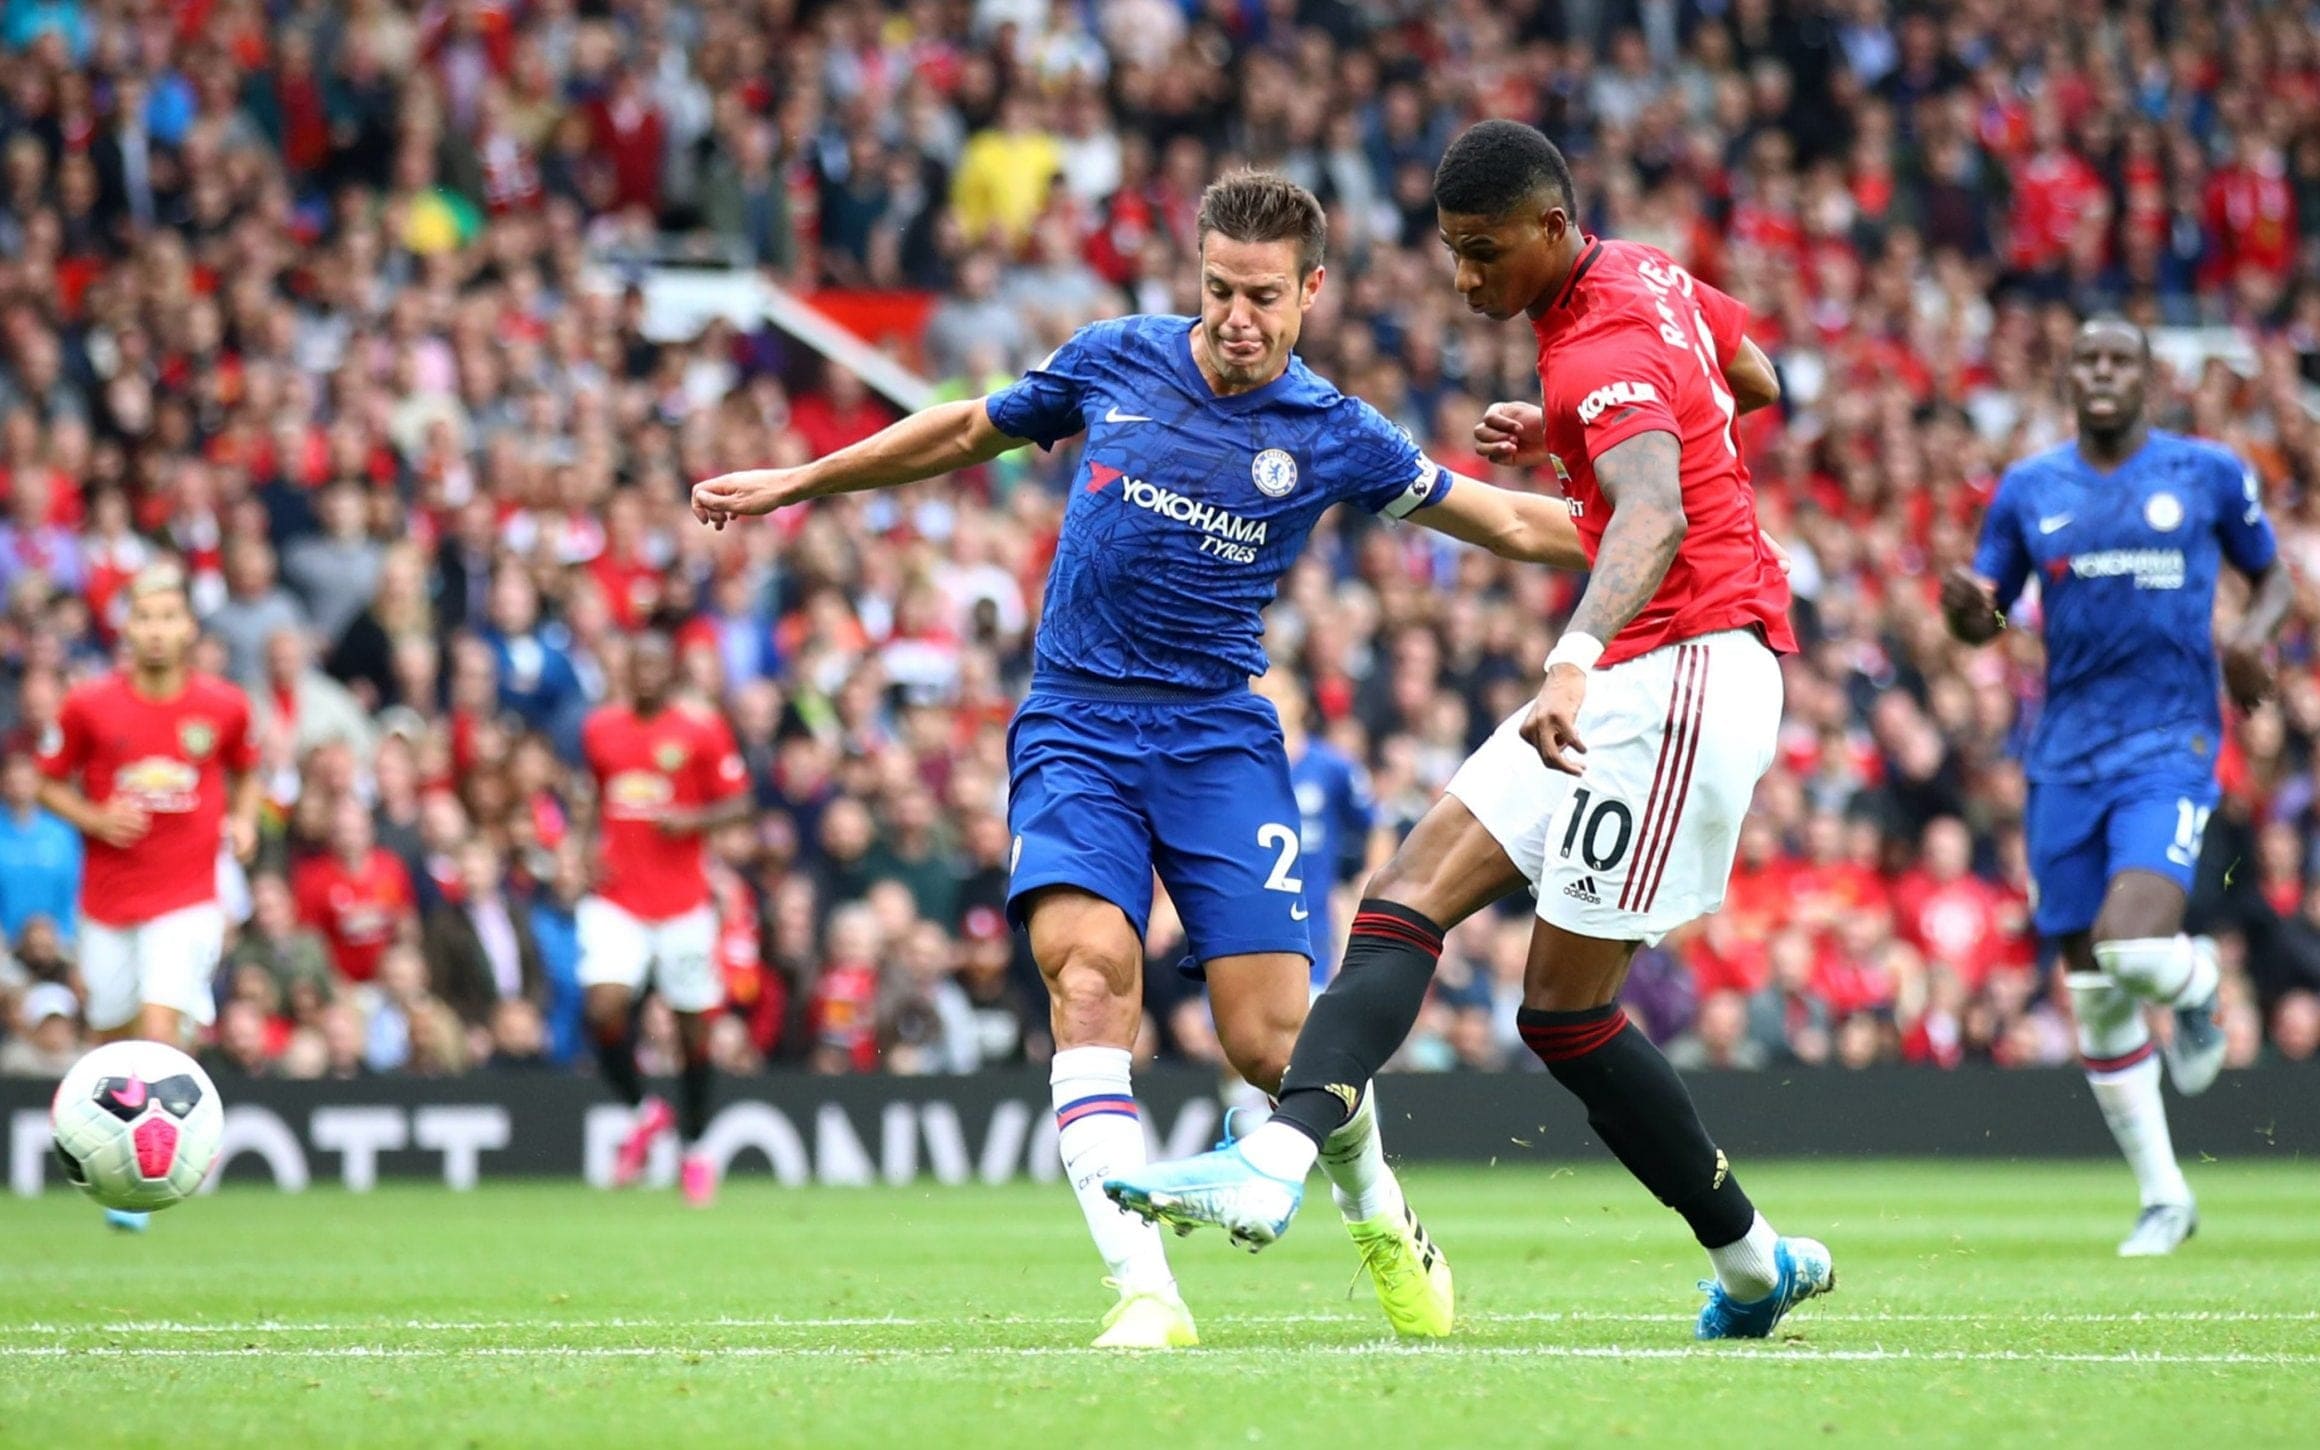 Chelsea vs Manchester United Free Betting Predictions - betting